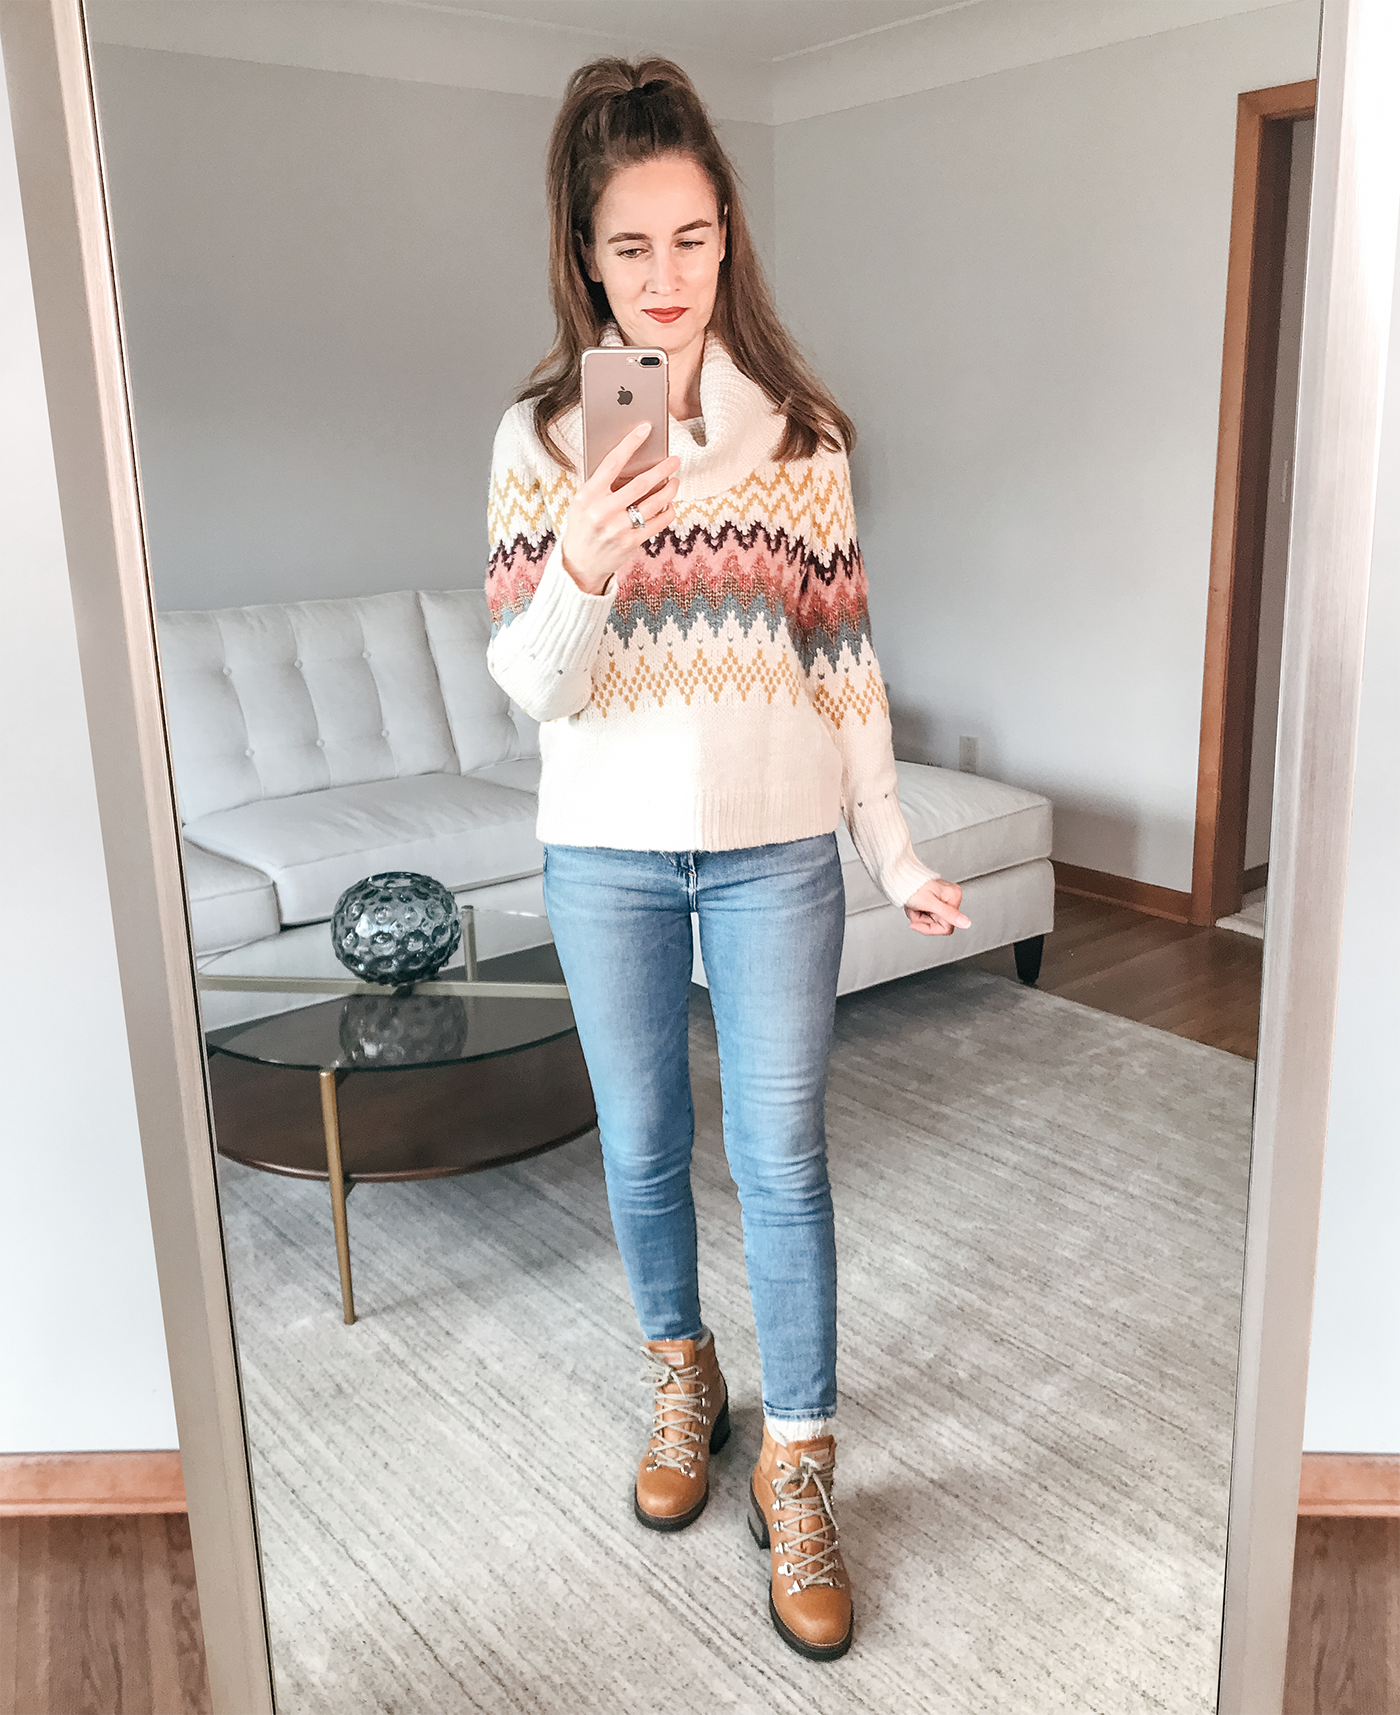 Daily Finds: Popular Fair Isle Sweater + Black Friday Picks